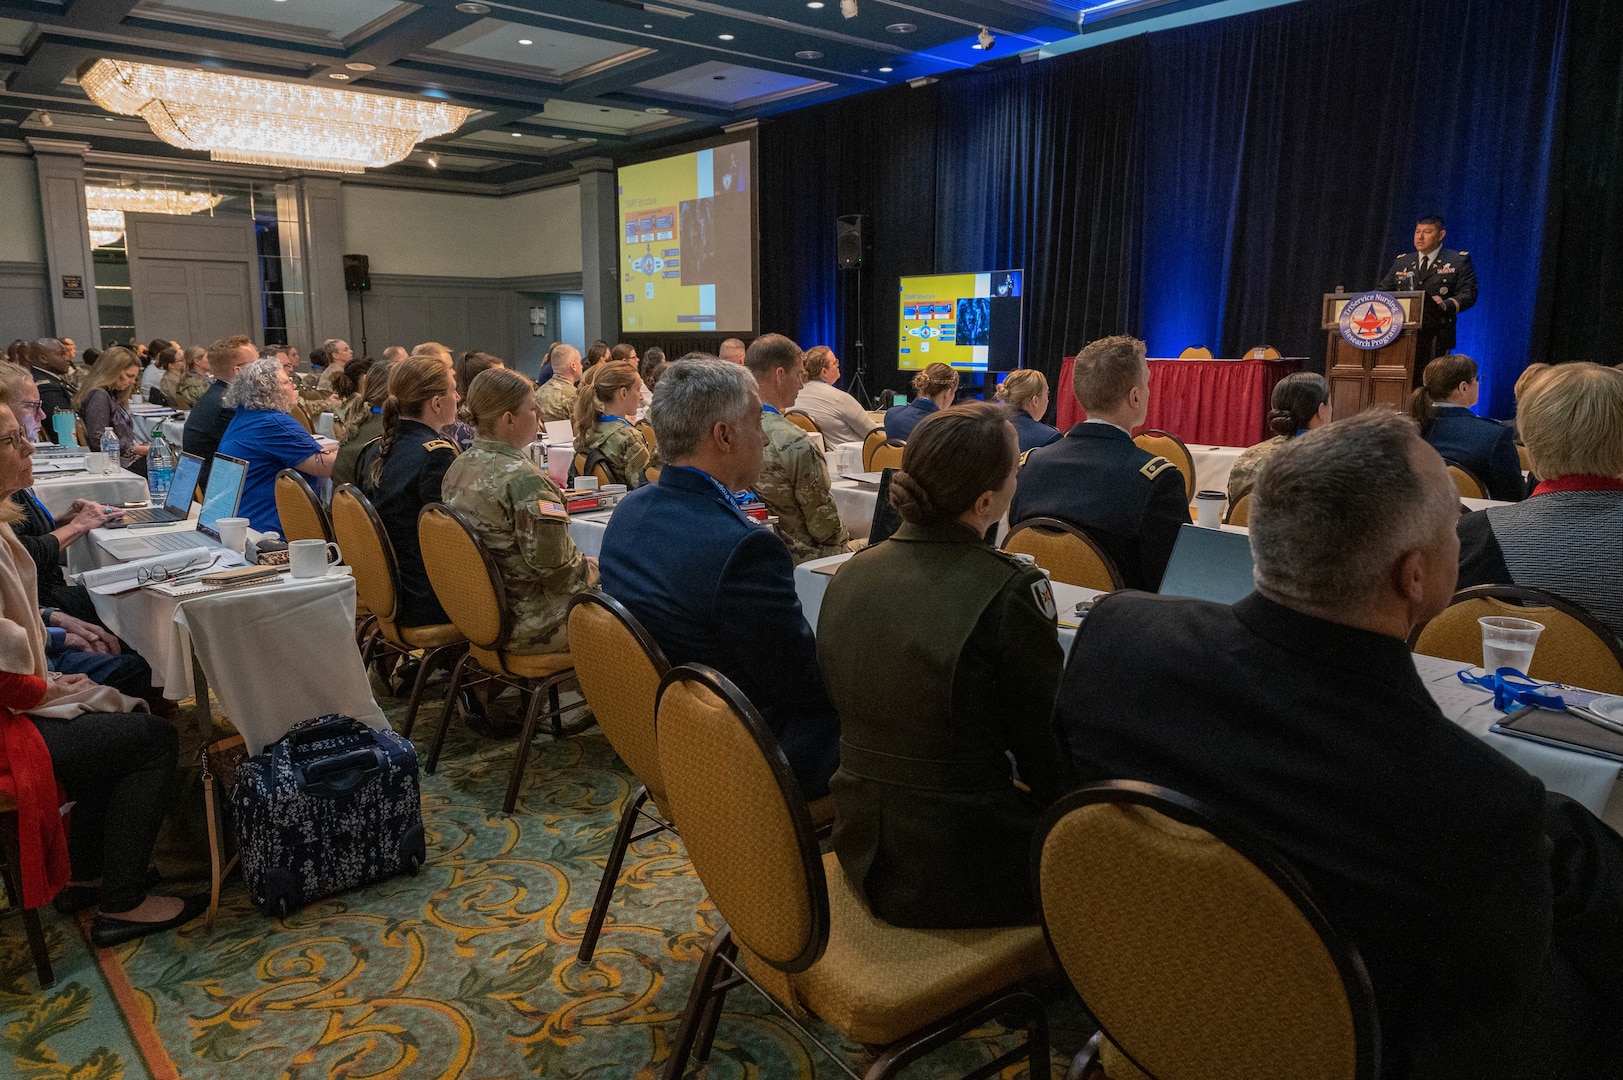 The TriService Nursing Research Program's annual Dissemination Course was held on April 4-6th, 2023, San Antonio, Texas. A room full of people sit while U.S. Army Executive Director Col. Young Yauger, PhD, CRNA, presents a power point slide to the attendees.